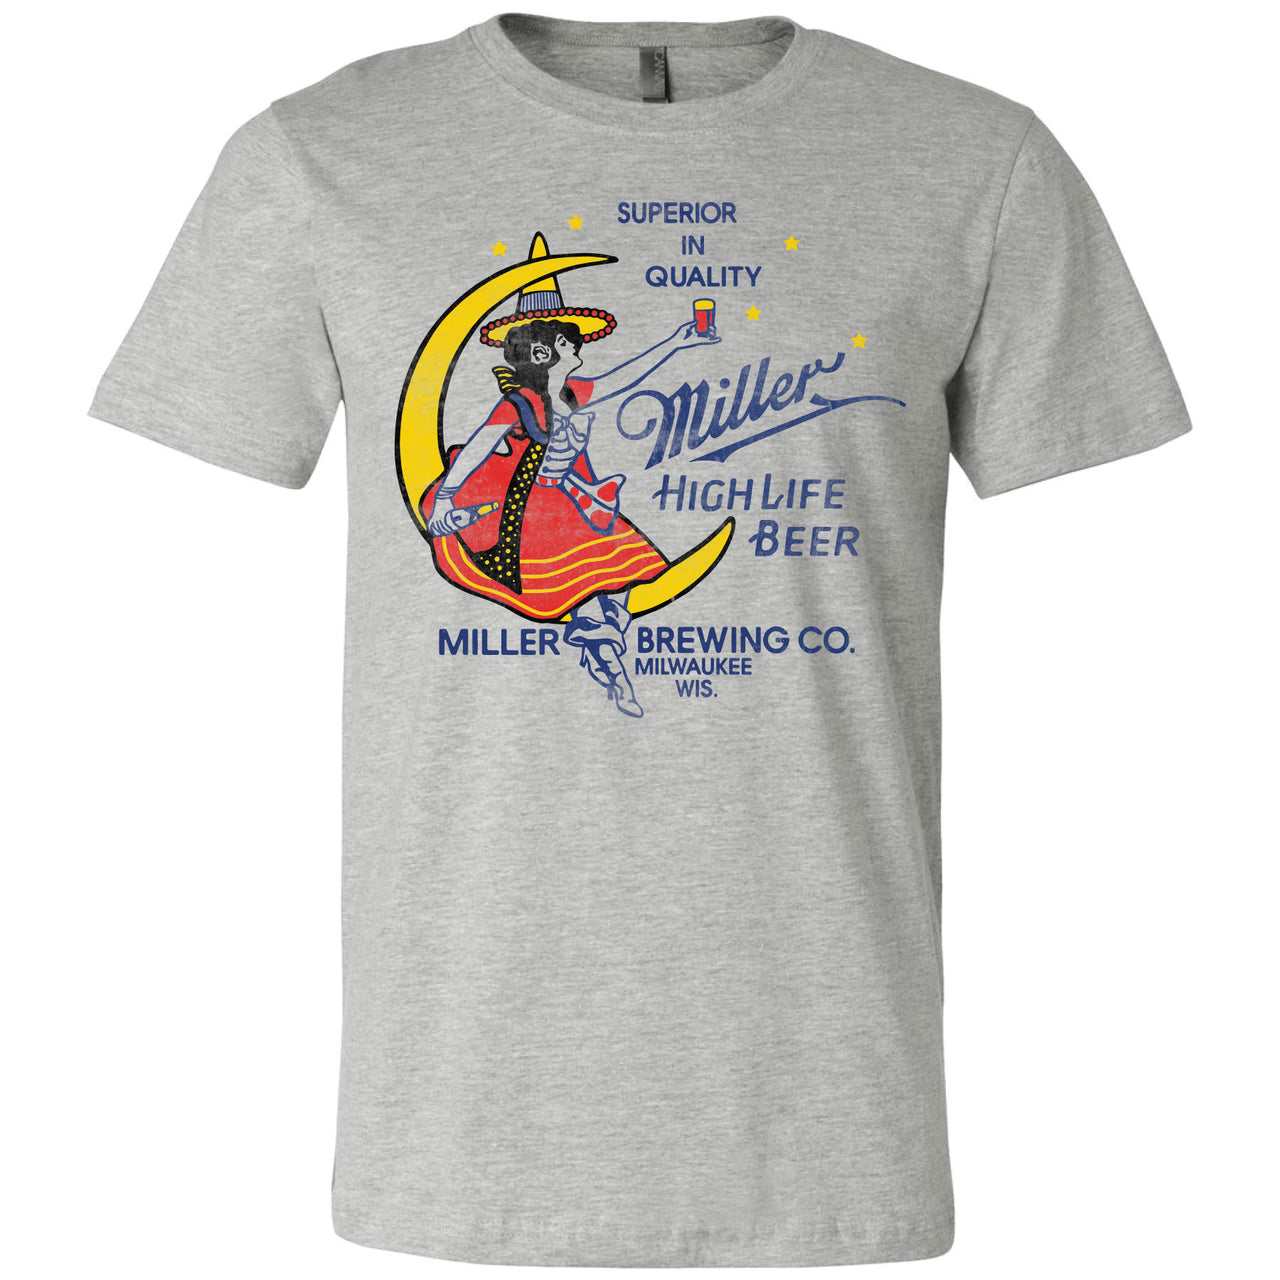 Miller High Life - Vintage Girl in the Moon T-shirt